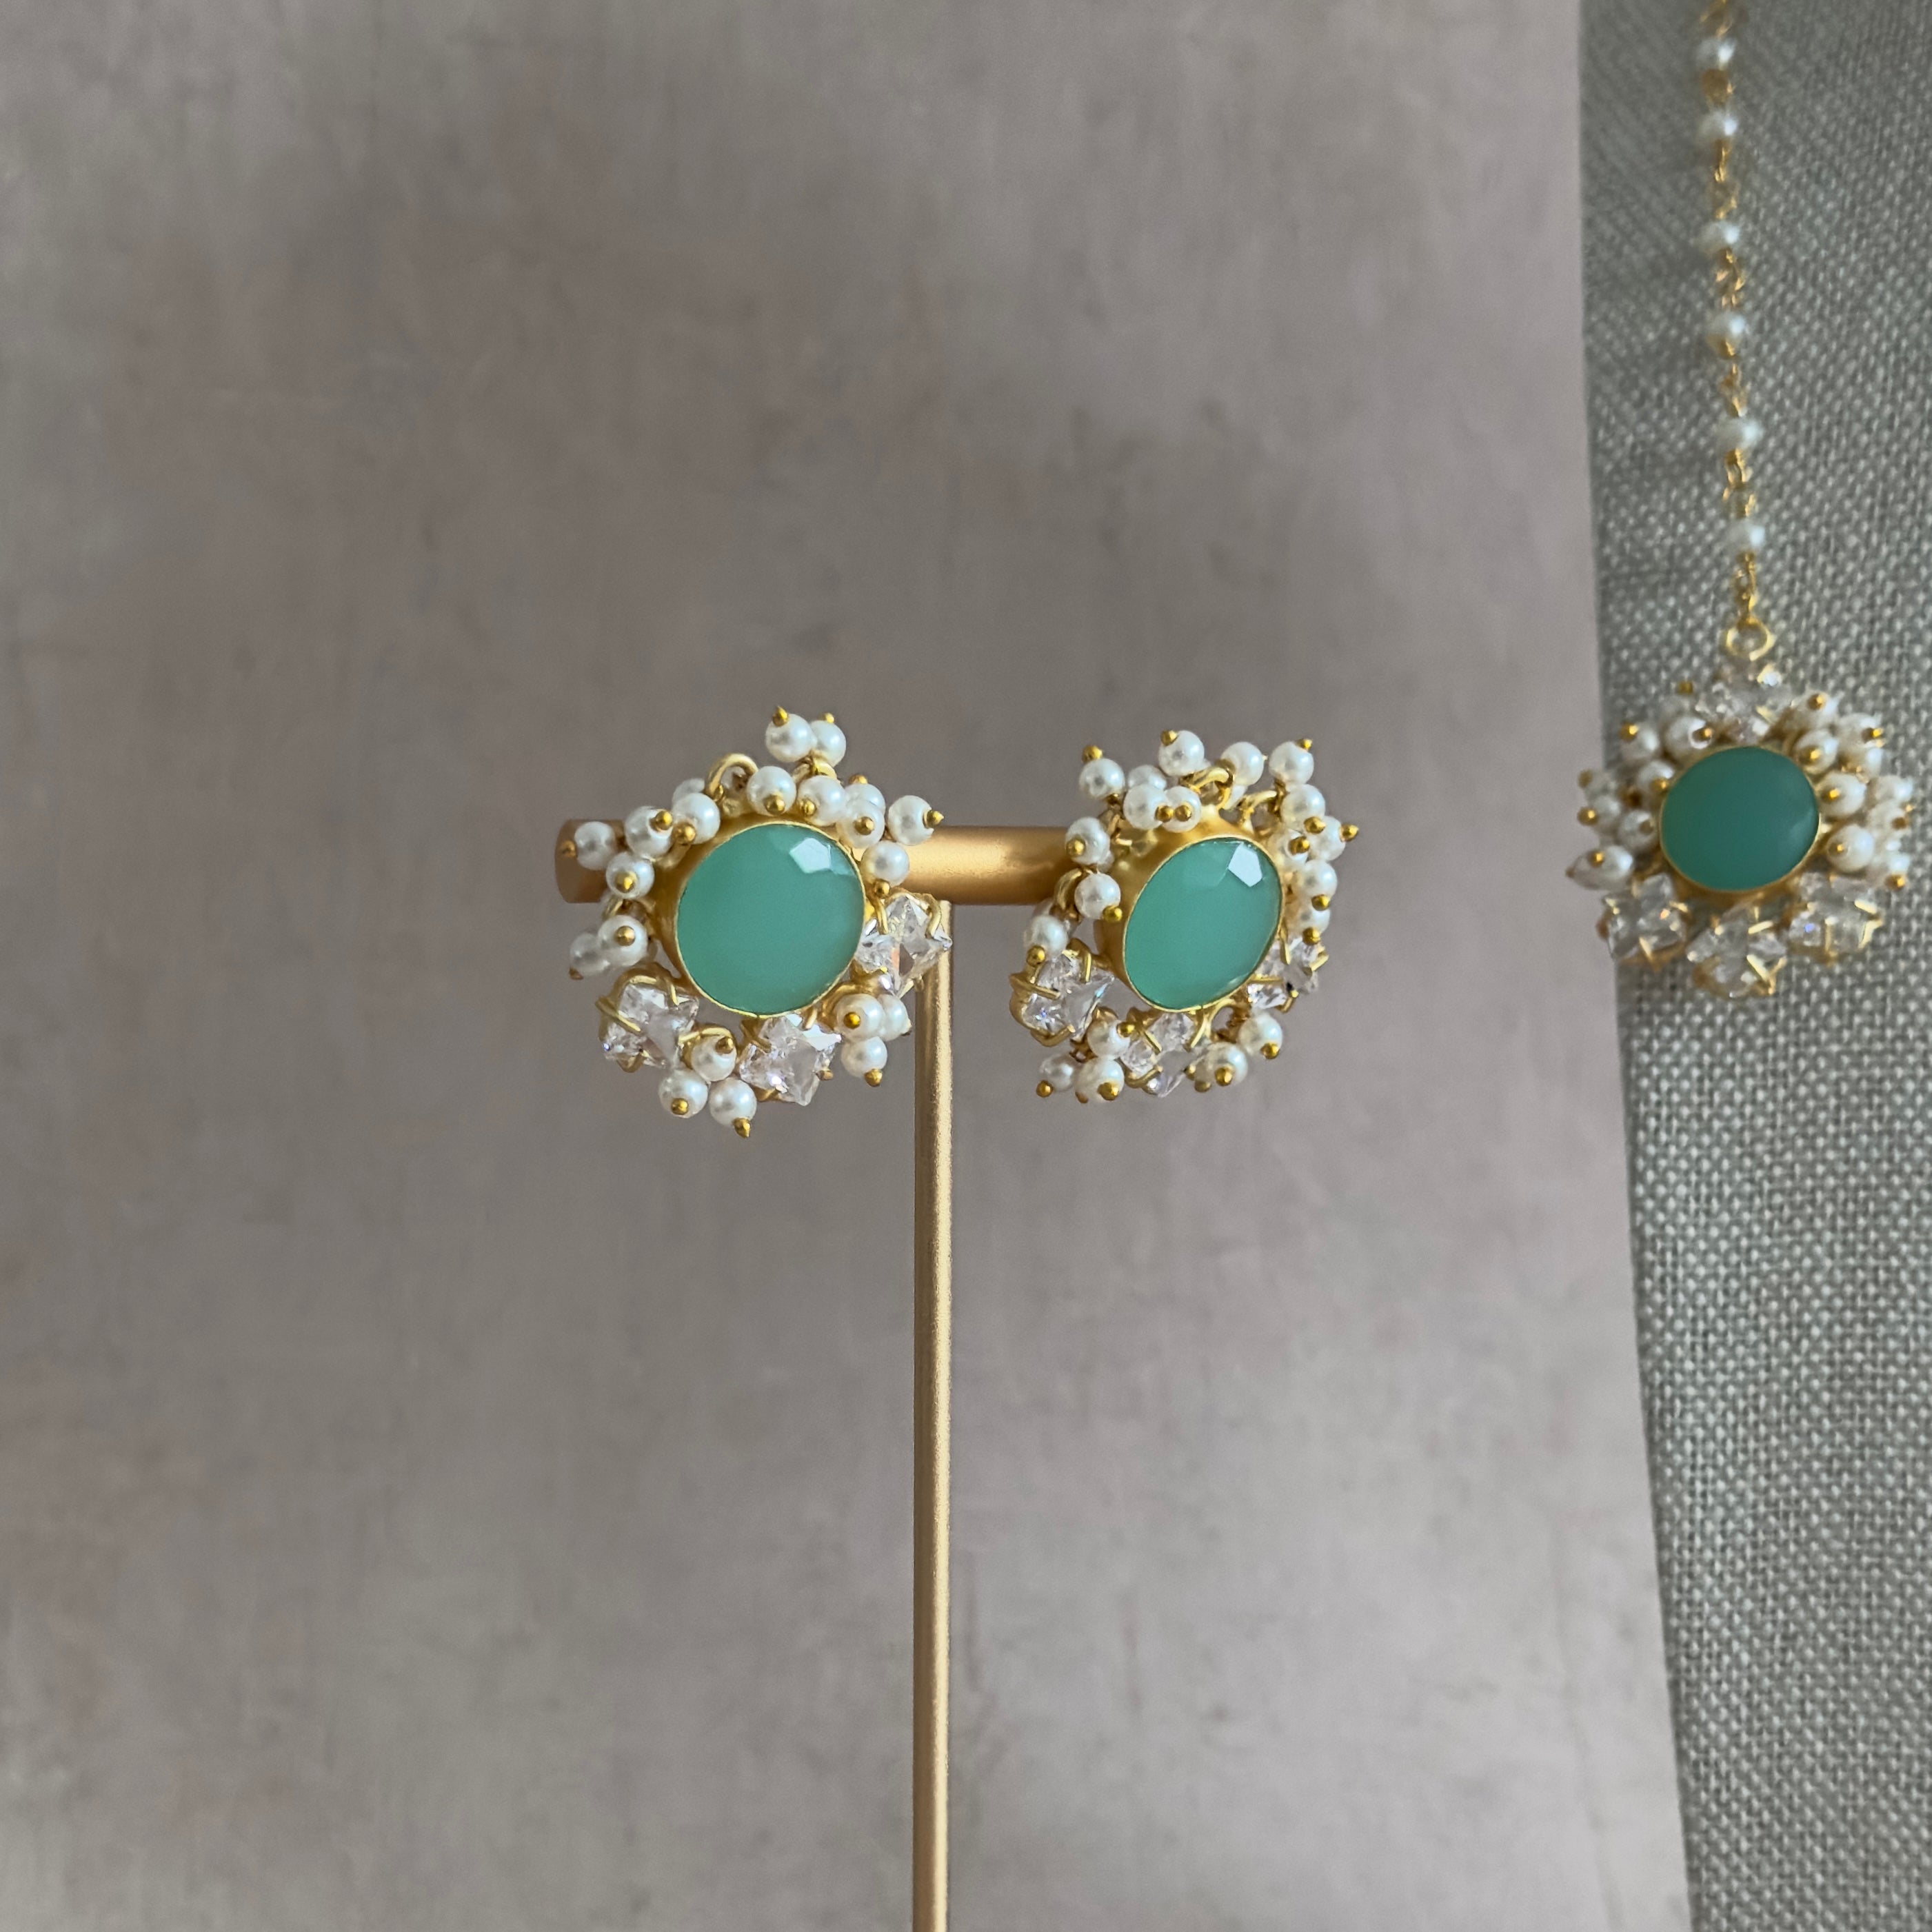 Experience the stunning hues of mint with our Grace Mint Crystal Choker Set. The glowing colors are beautifully paired with sparkling cubic zirconia for an irresistible combination. The adjustable chain tie allows for the perfect fit, and it comes complete with matching earrings and tikka. Elevate your look with this elegant set!